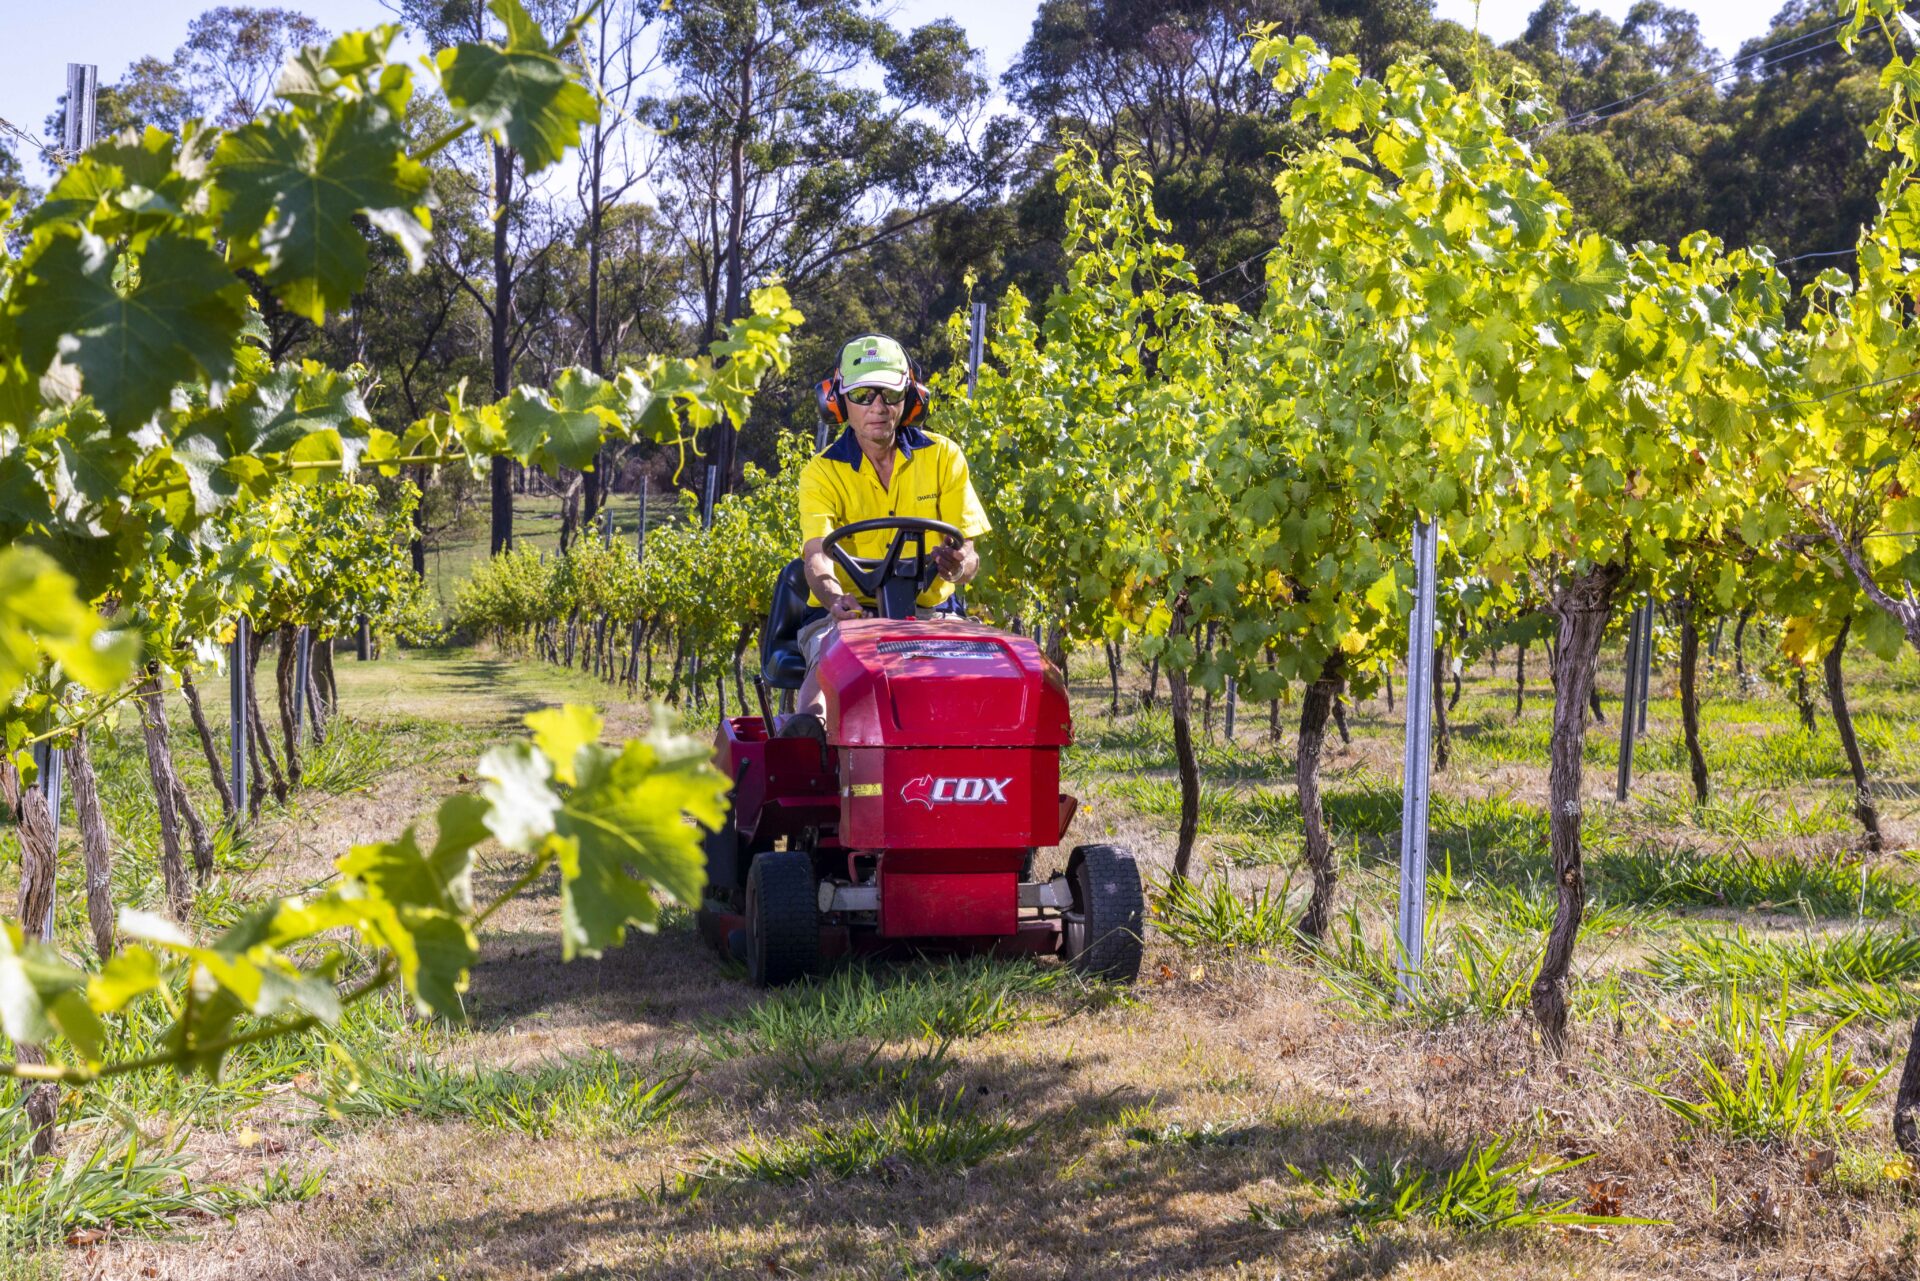 A male grounds maintenance supported employee is driving a ride on mower on the lawn in an orchard.